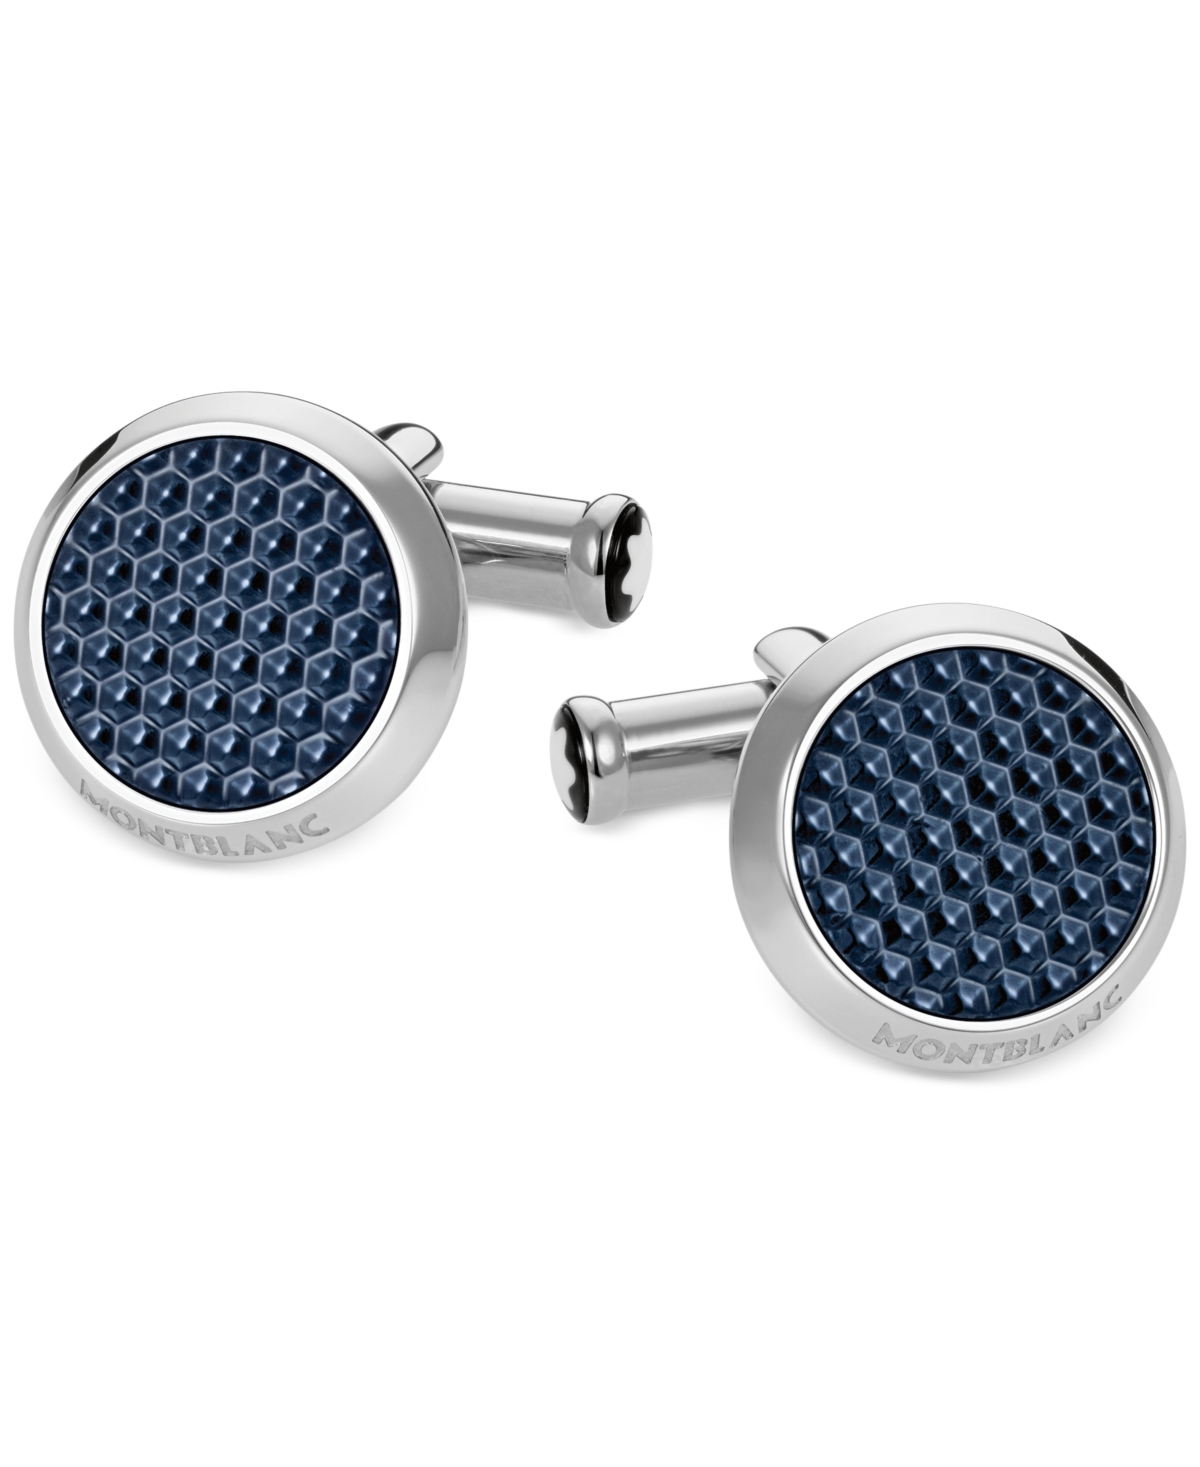 Unisex Meisterstuck Classic Stainless Steel with Blue Lacquer Inlay Cuff Links 112904